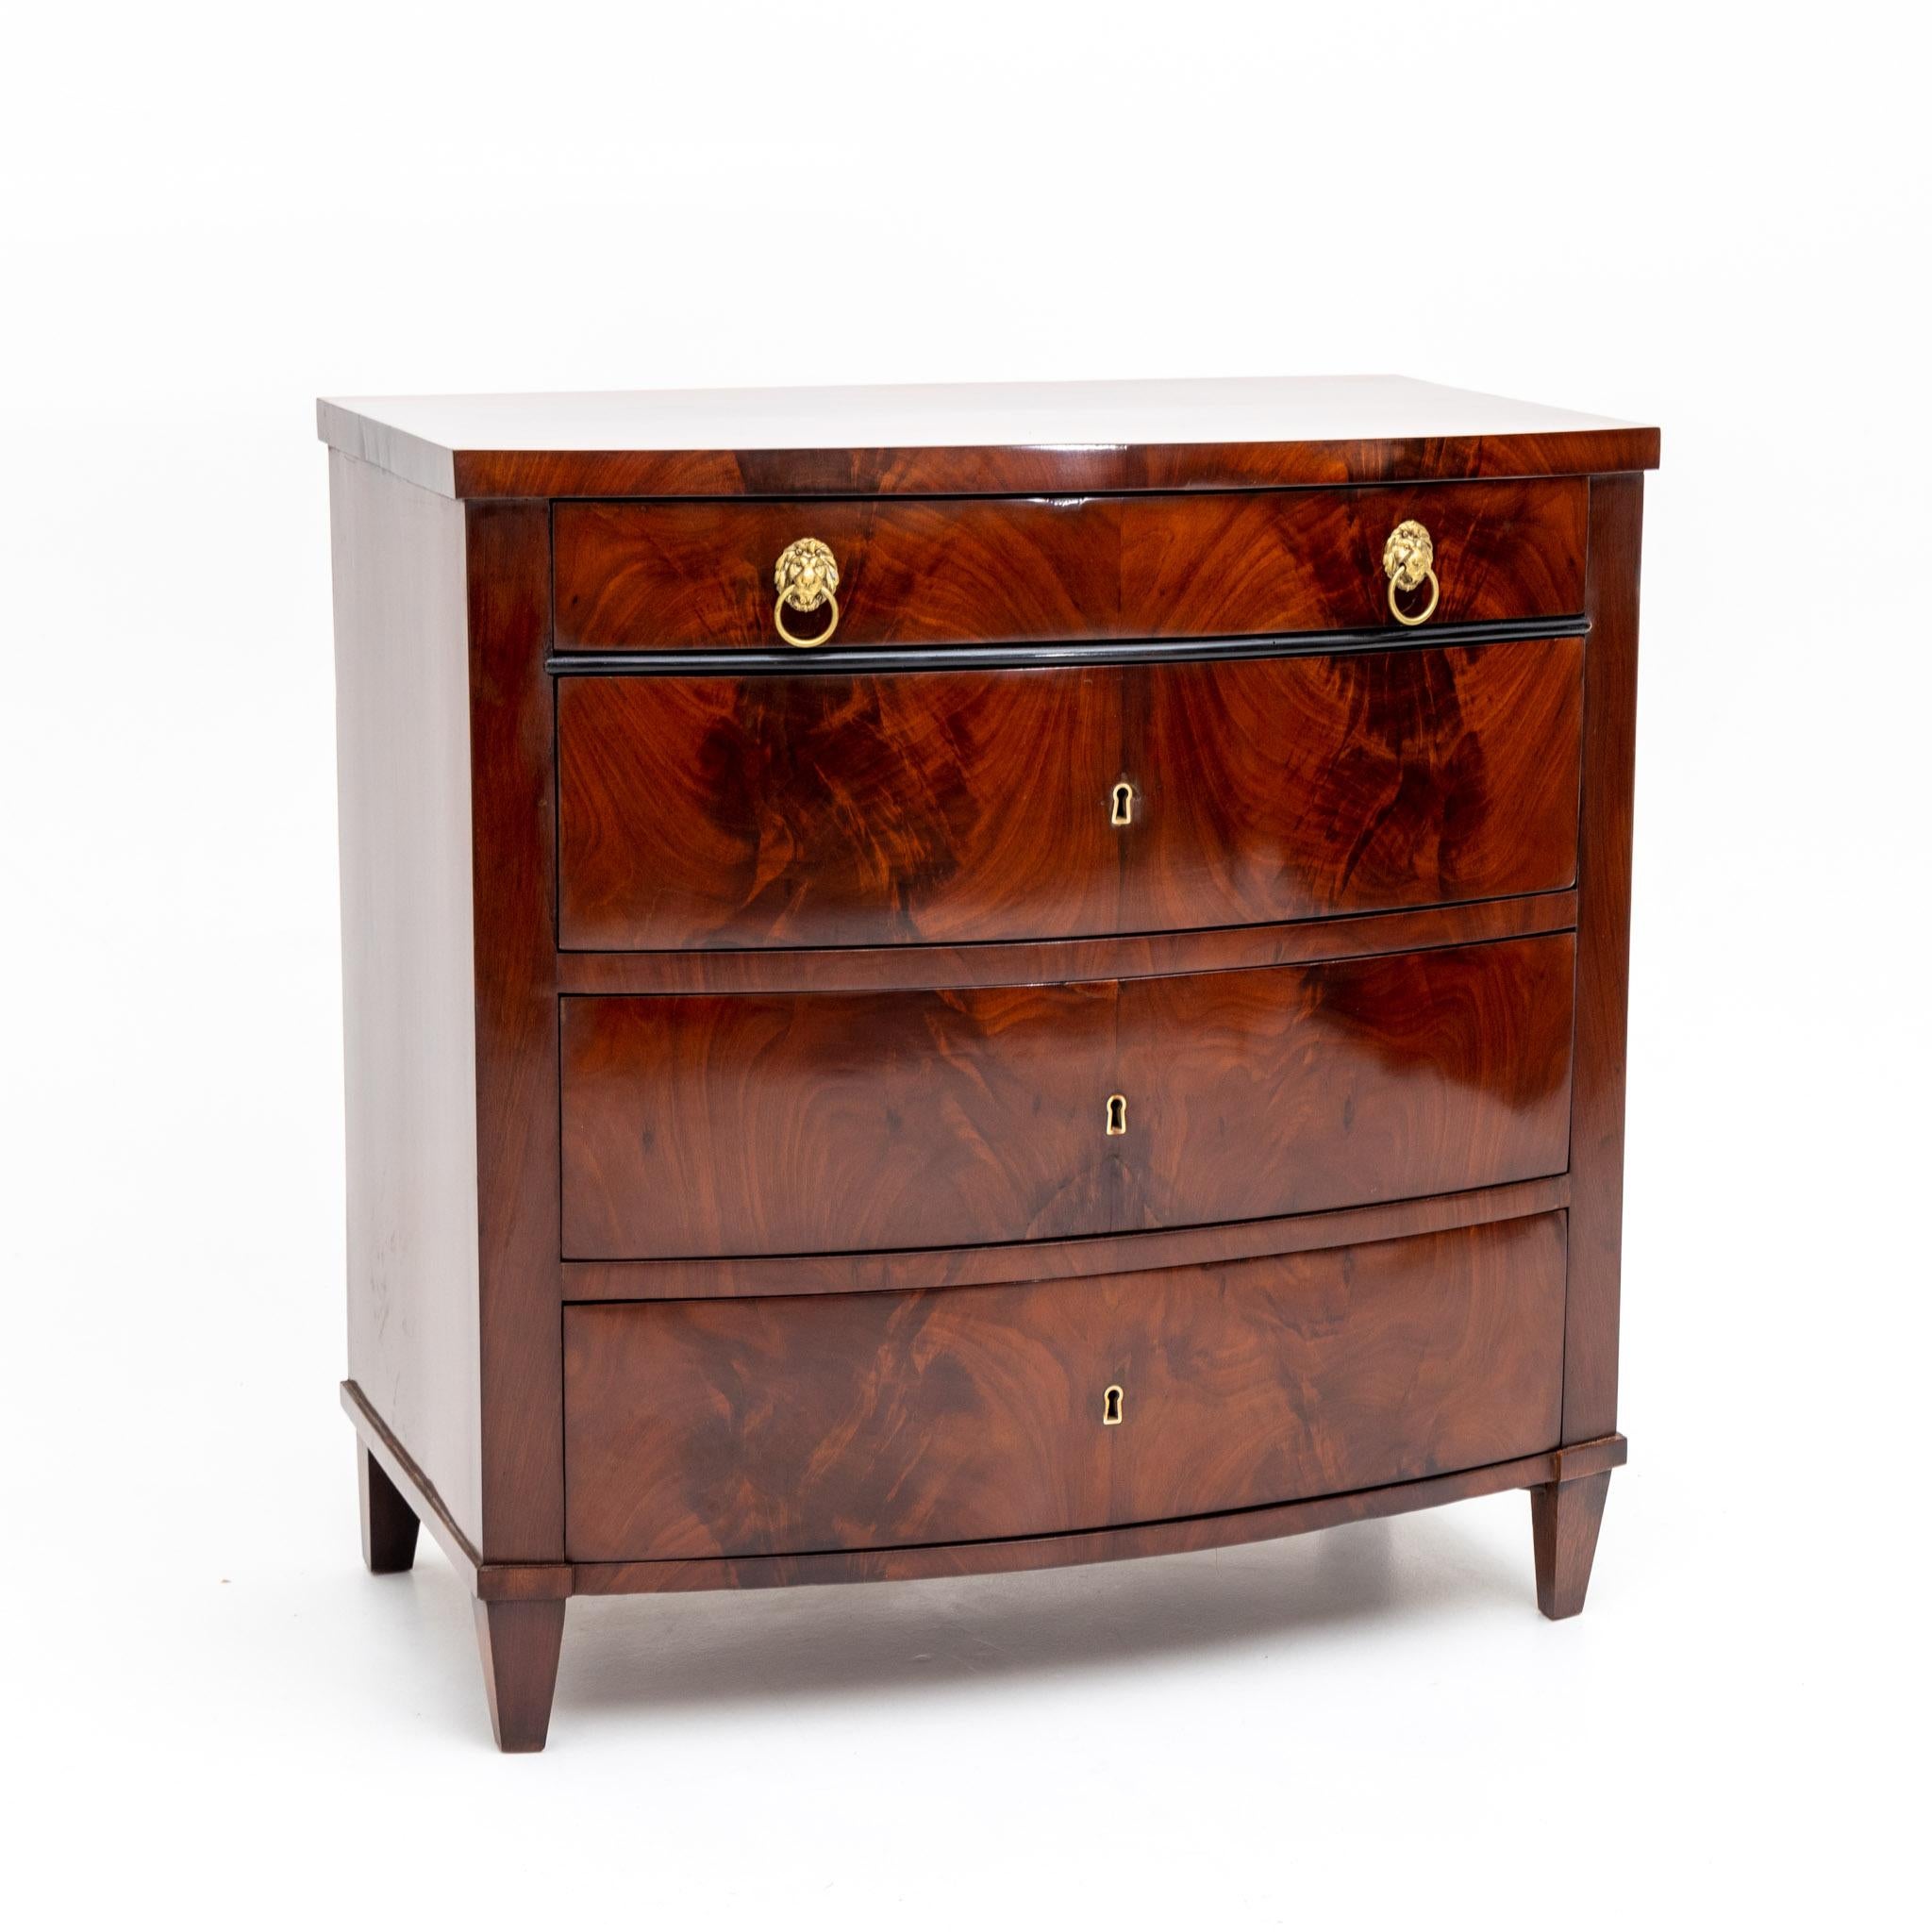 Mahogany veneered chest of drawers with a bow front, four drawers and lion head fittings.